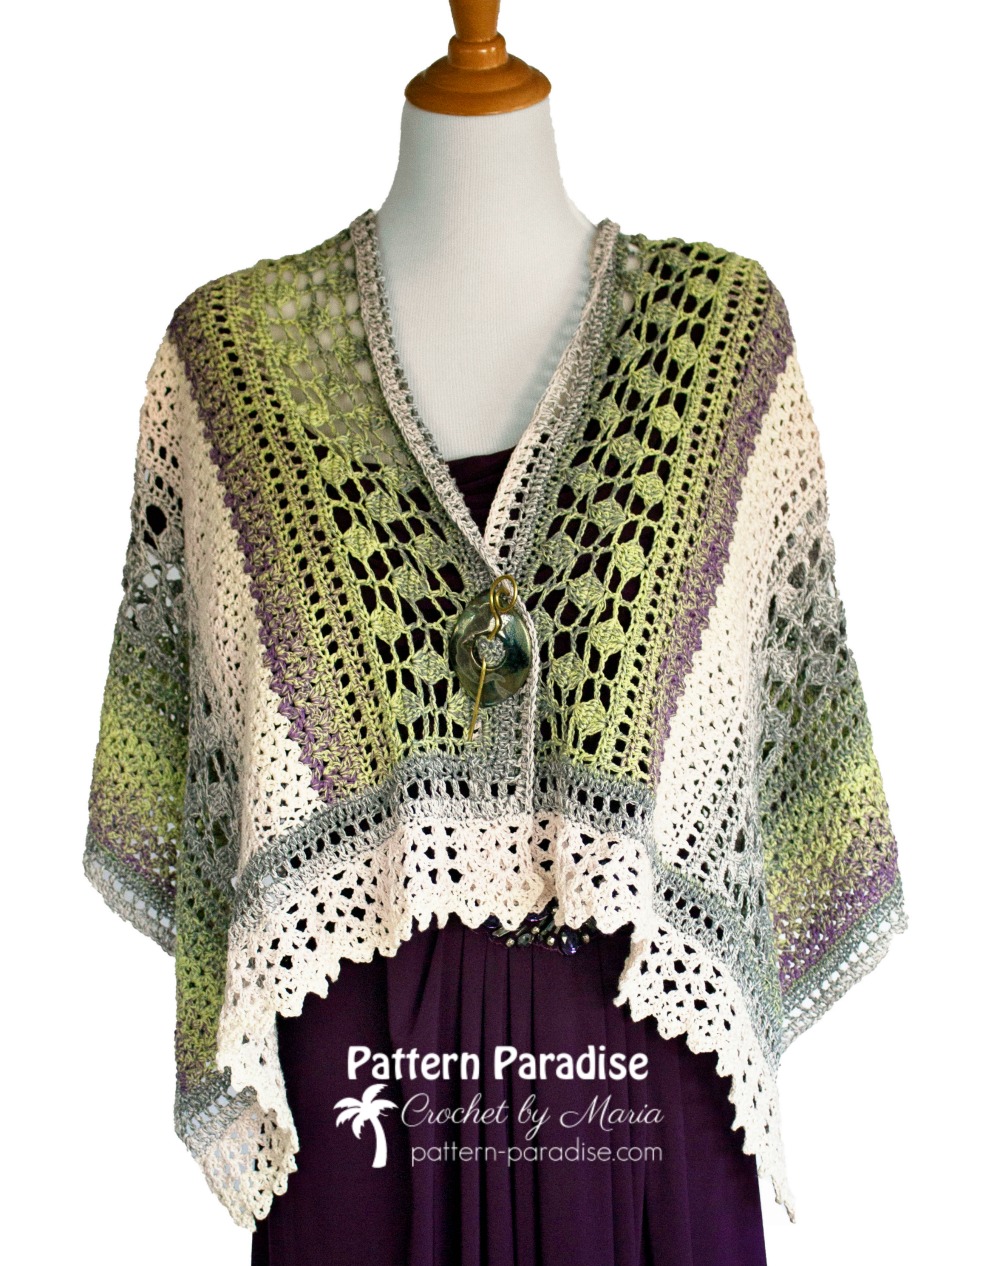 Winter Indulgence Wrap on Pattern-Paradise.com | A beautiful addition to your wardrobe anytime of year! 